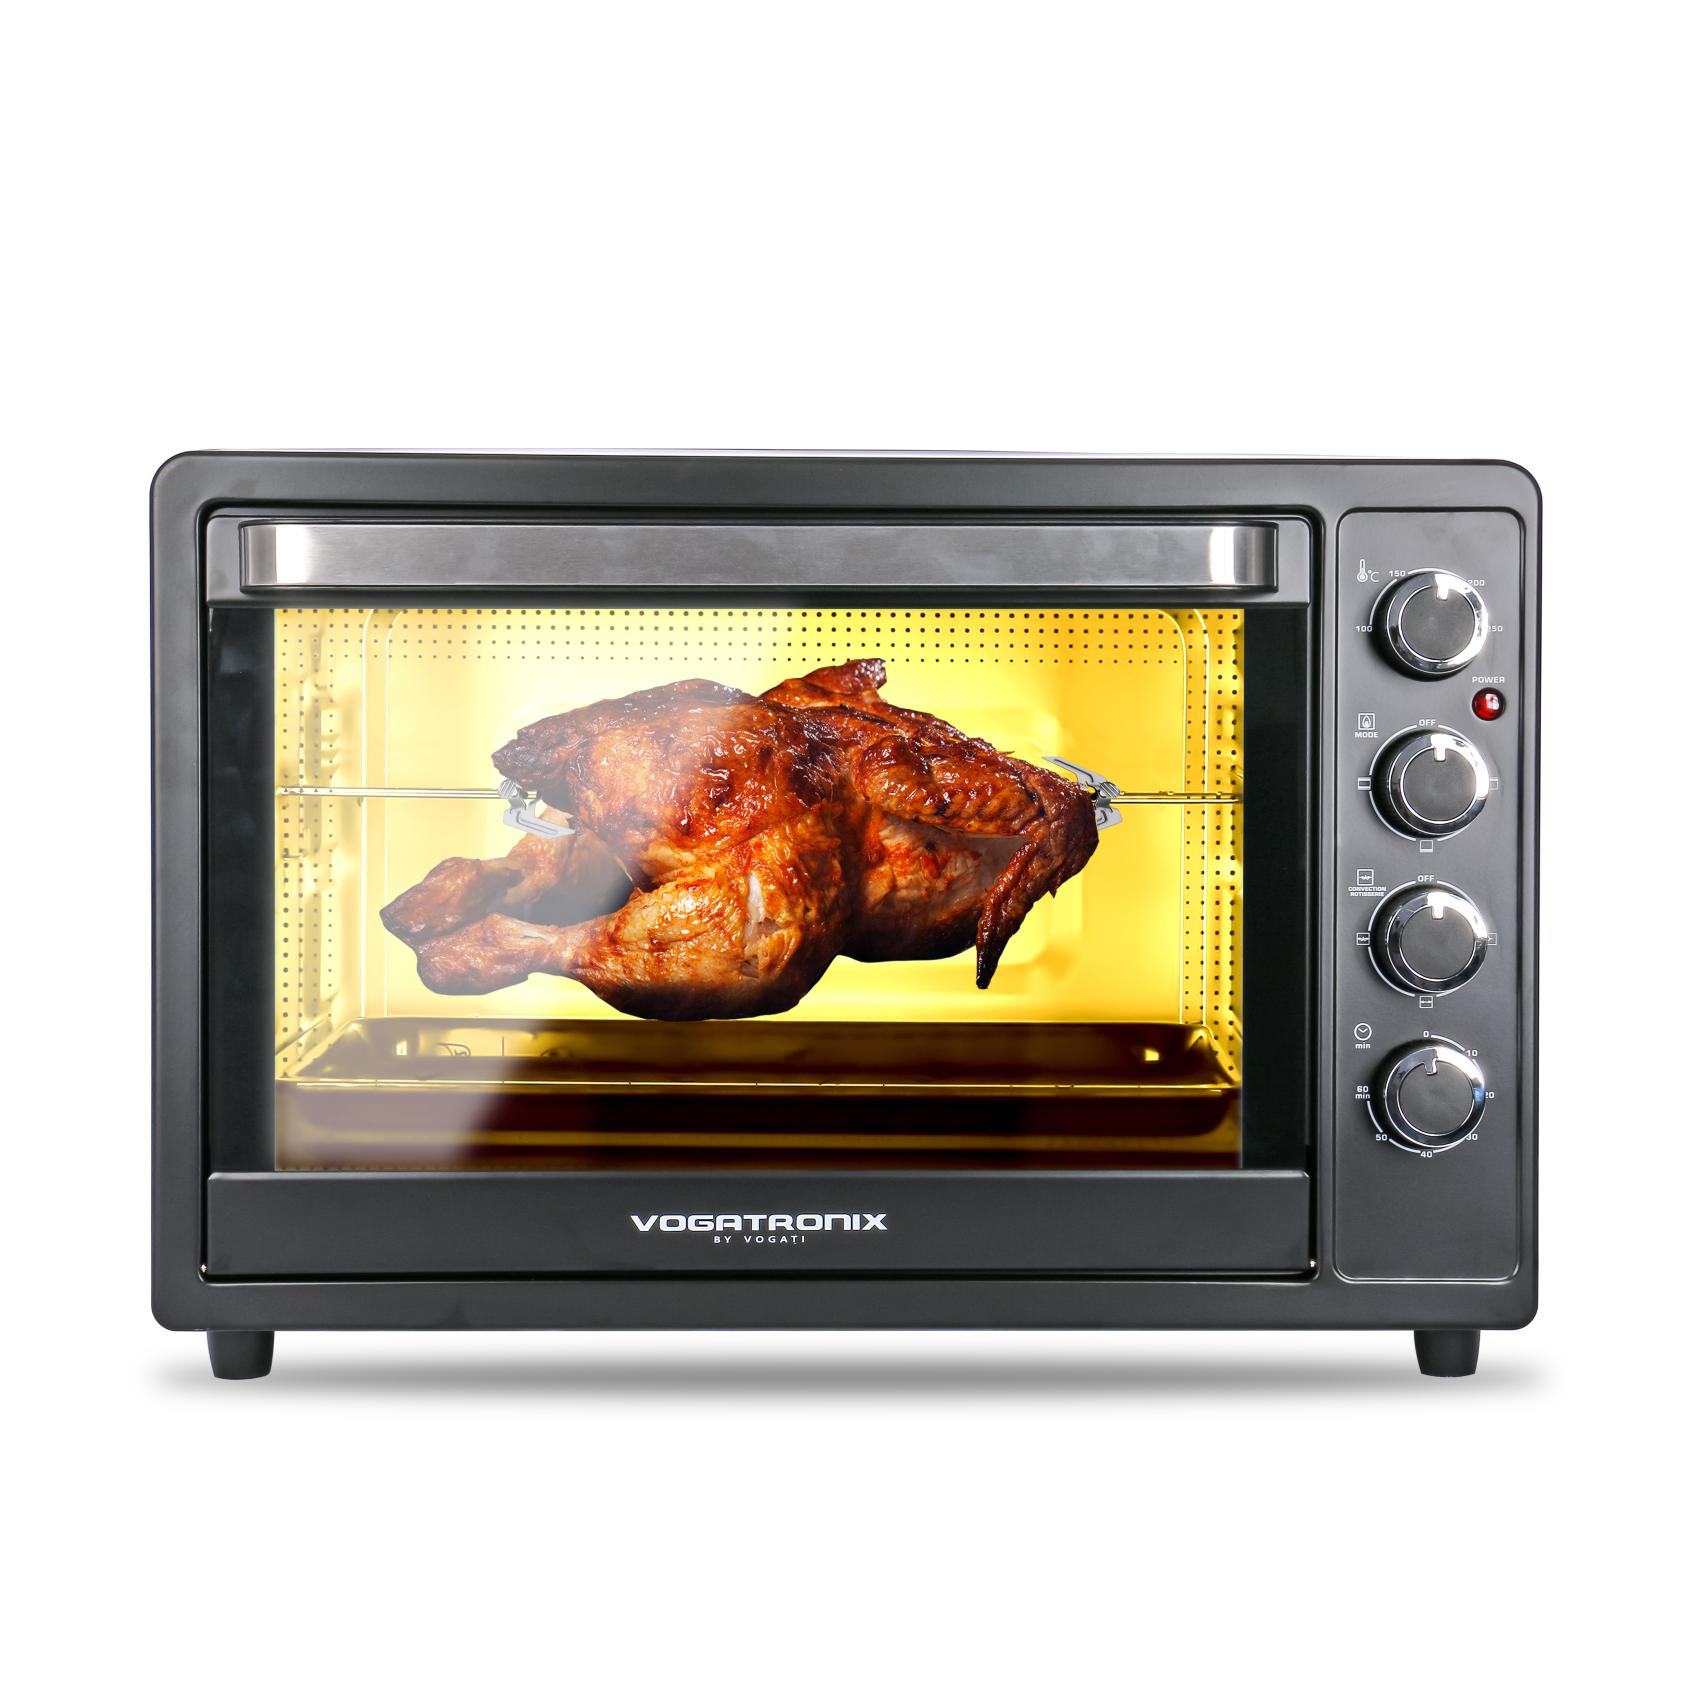 MICROVAVE OVEN 60L WITH ROTISSERIE GRILL 2200W | 3 HEATING MODES | KNOB CONTROL CONVECTION OVEN | TOASTING- BAKING- BROILING- ROASTING | TEMPERATURE CONTROL UP TO 250C° | STAINLESS STEEL HEATING ELEMENTS | TIMER WITH ALAM VE-175